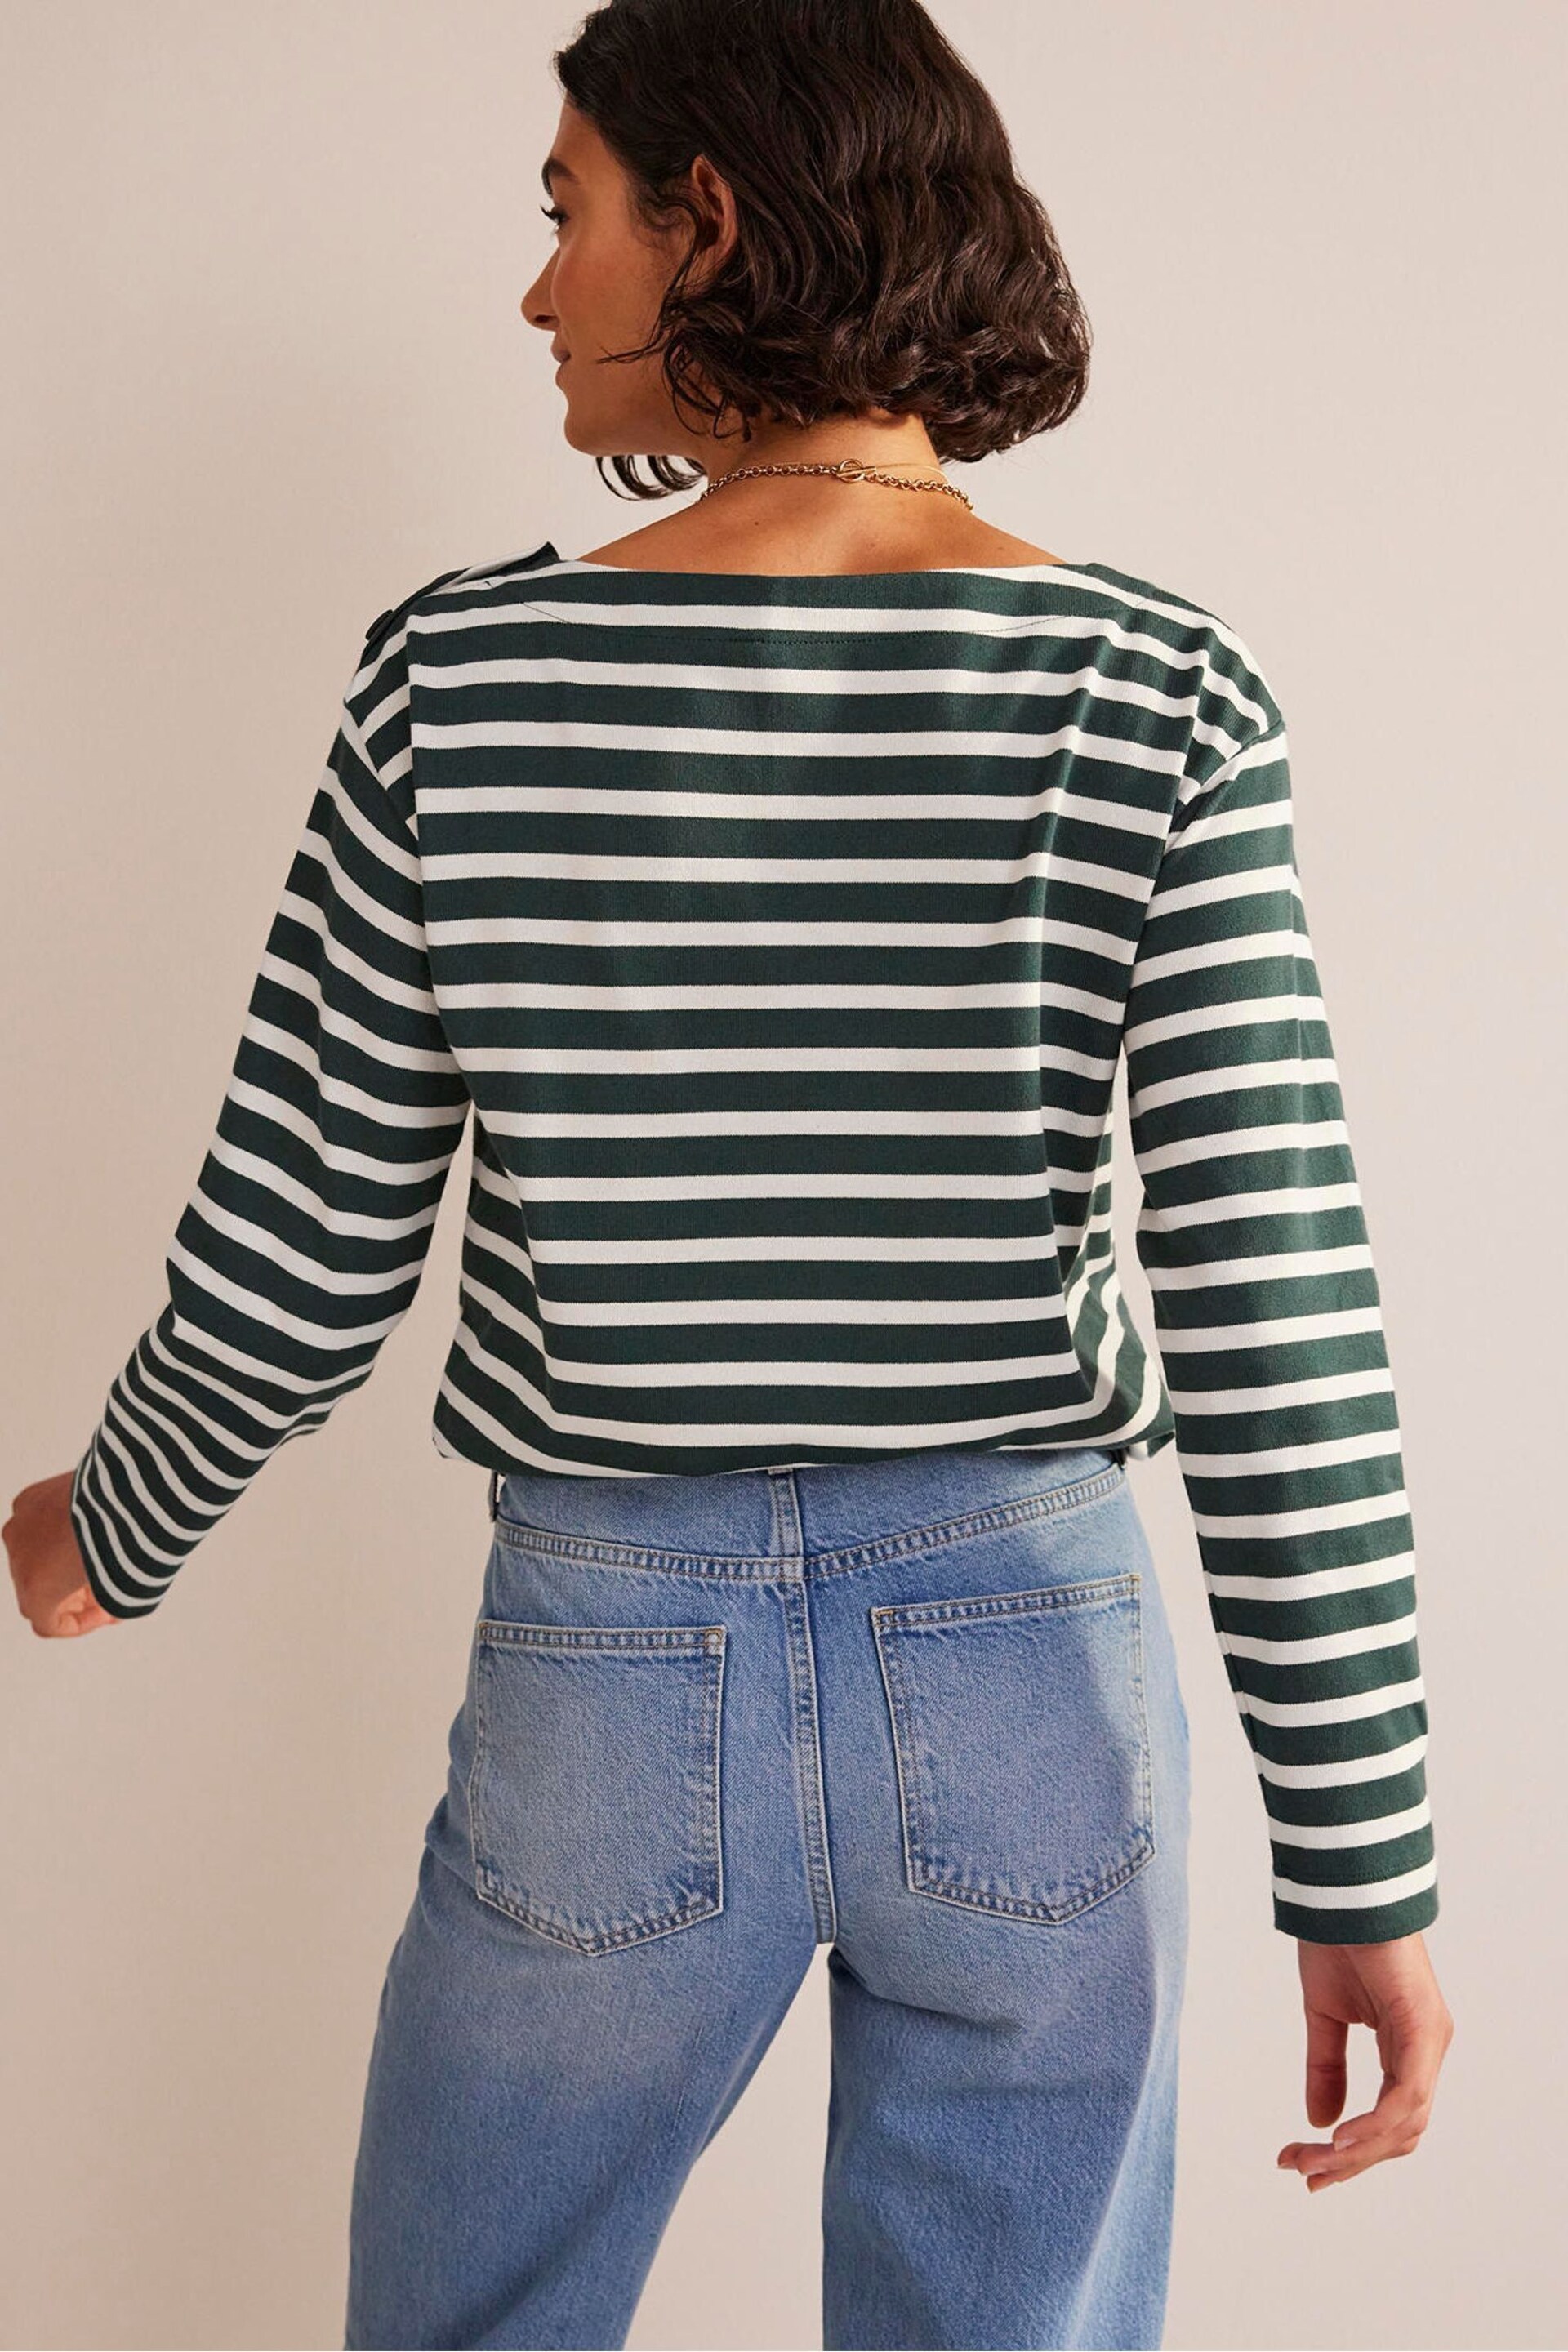 Boden Green Sophie Heavyweight Breton Top - Image 2 of 5